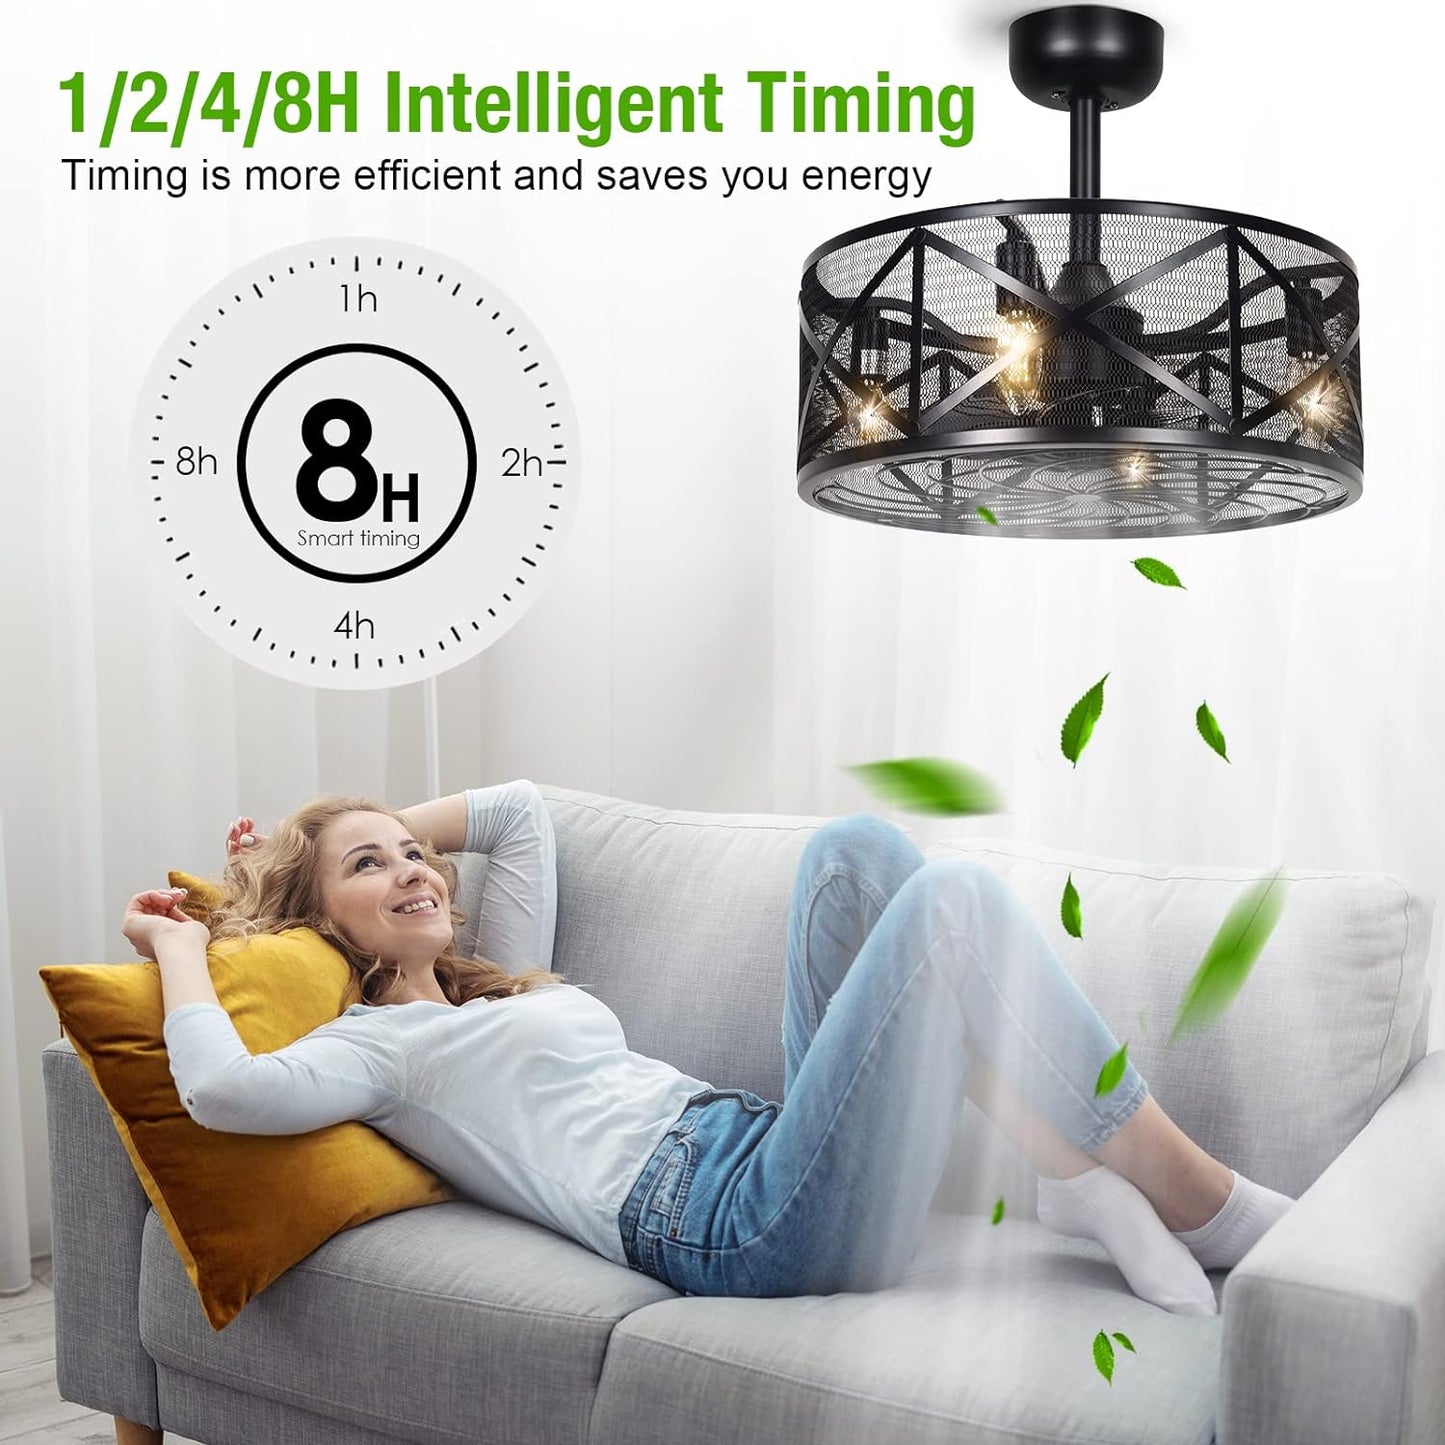 AEsocd Ceiling Fans with Lights Remote Control, 6 Speeds Enclosed Ceiling Fans, Caged Industrial Ceiling Fan for Bedroom, Living Room, Kitchen (Black) (Black-W)